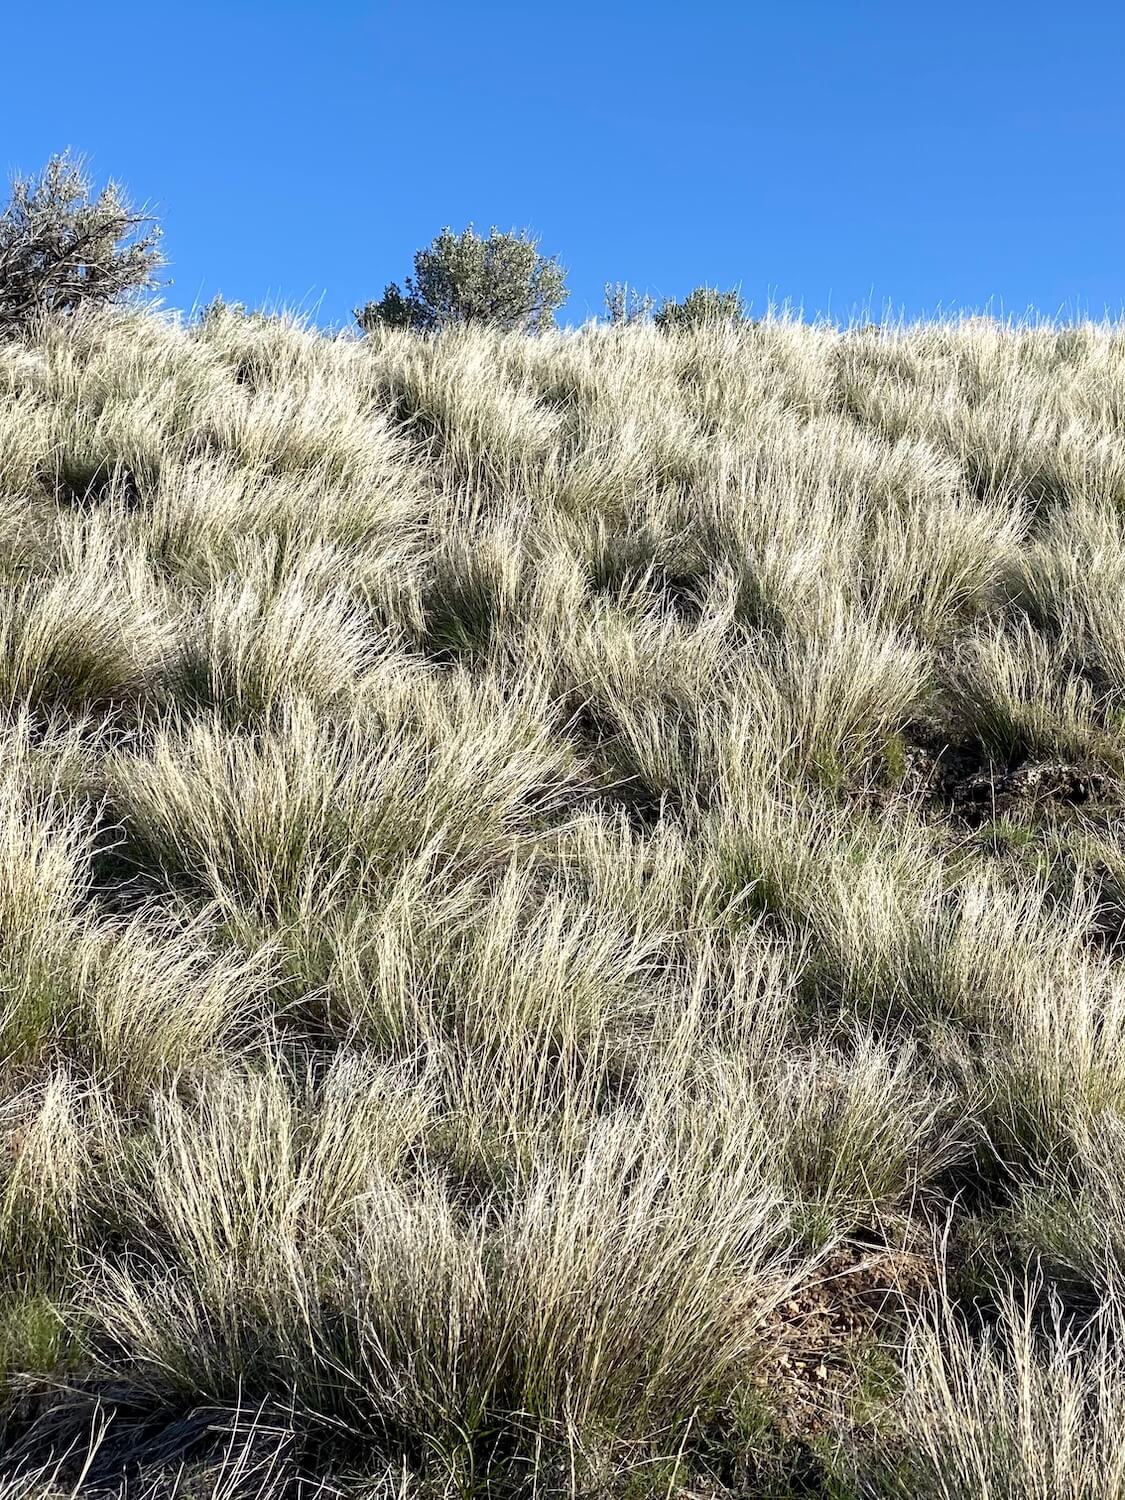 Grasses blow on the highest ridge of the Painted Hills, Carroll Rim Trail.  The sky above is bright blue and a few larger juniper plants rise up at the top of the ridge. 